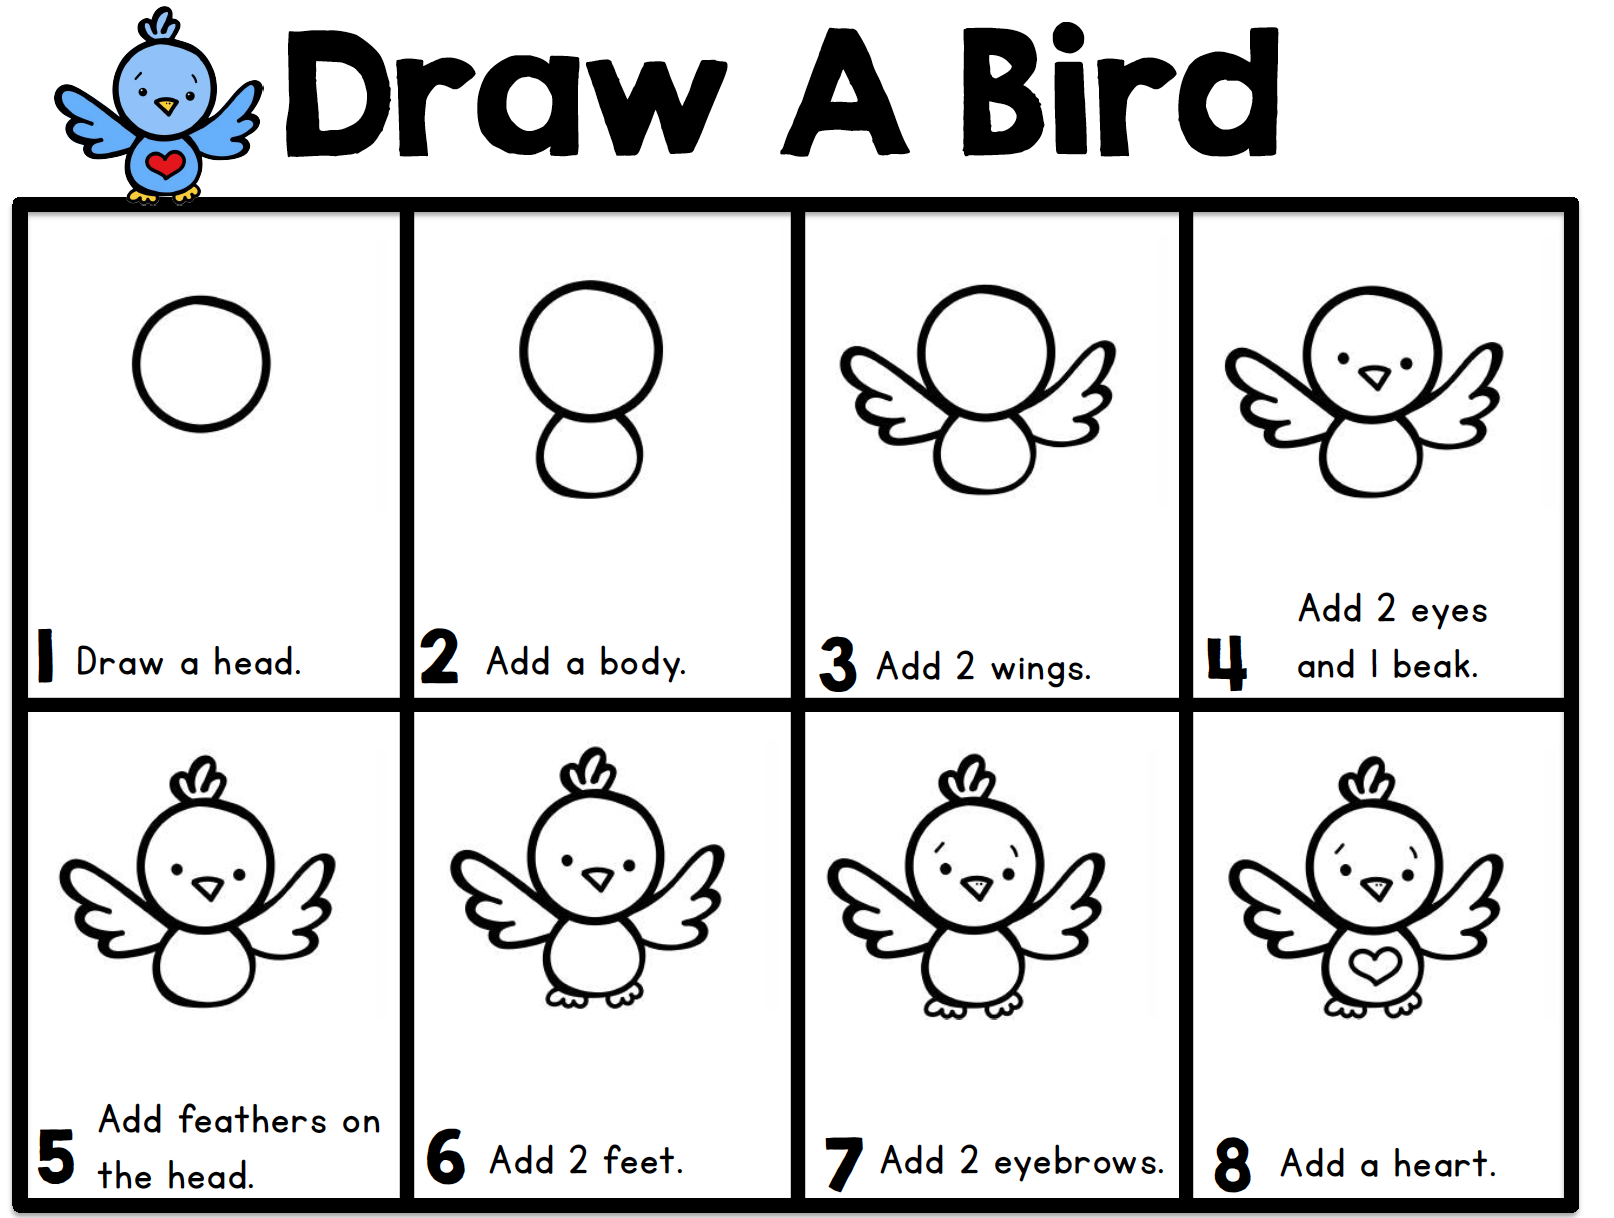 Directed Drawing Bird Whimsy Teaching